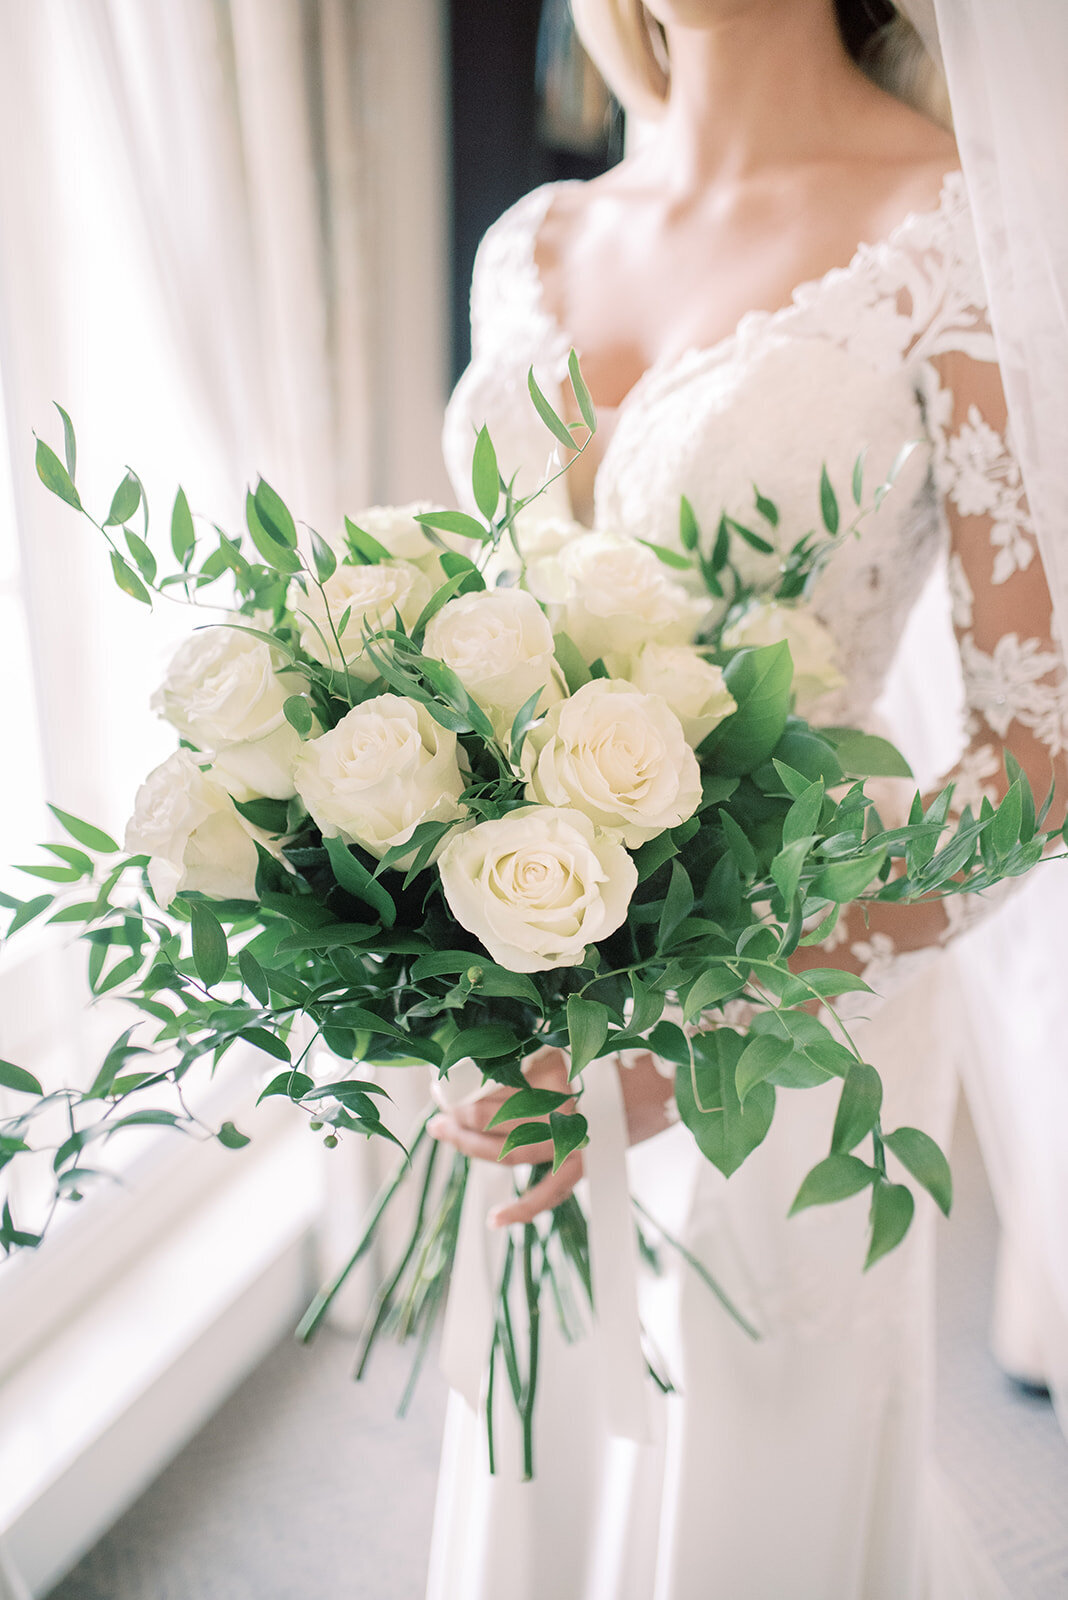 Bride holding her bouquet stood by the window, the bouquet is white long stem roses and the bride is wearing a white lace gown. The image is focused on the bouqet